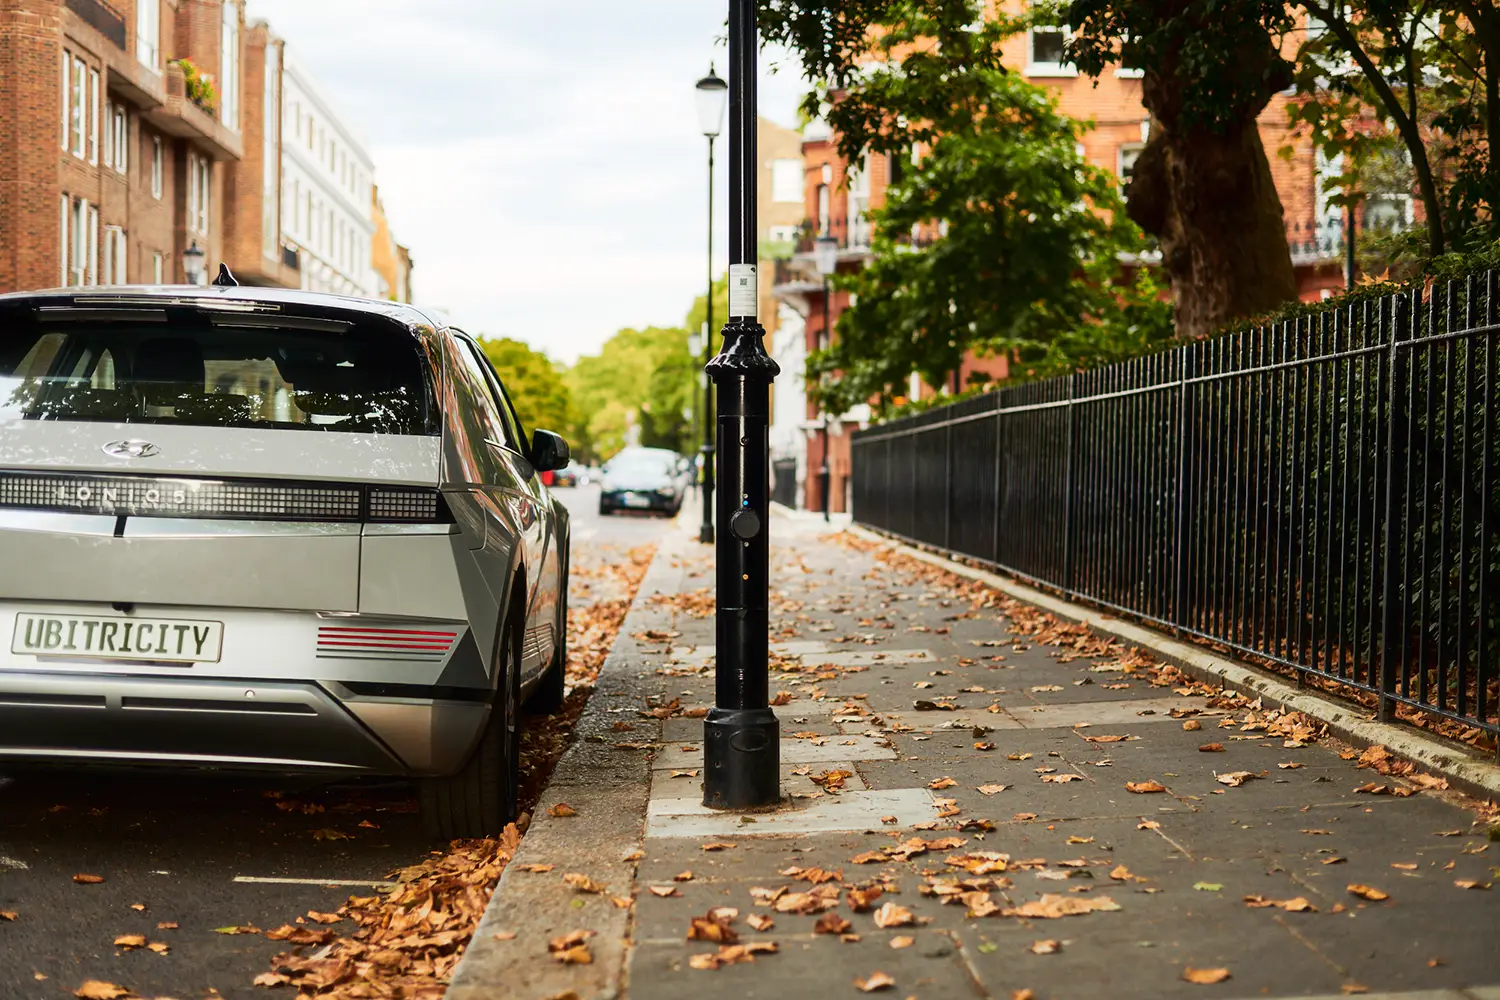 An EV is charging its battery at an ubitricity ac lamppost charger which are rolled-out in partnership with Siemens.